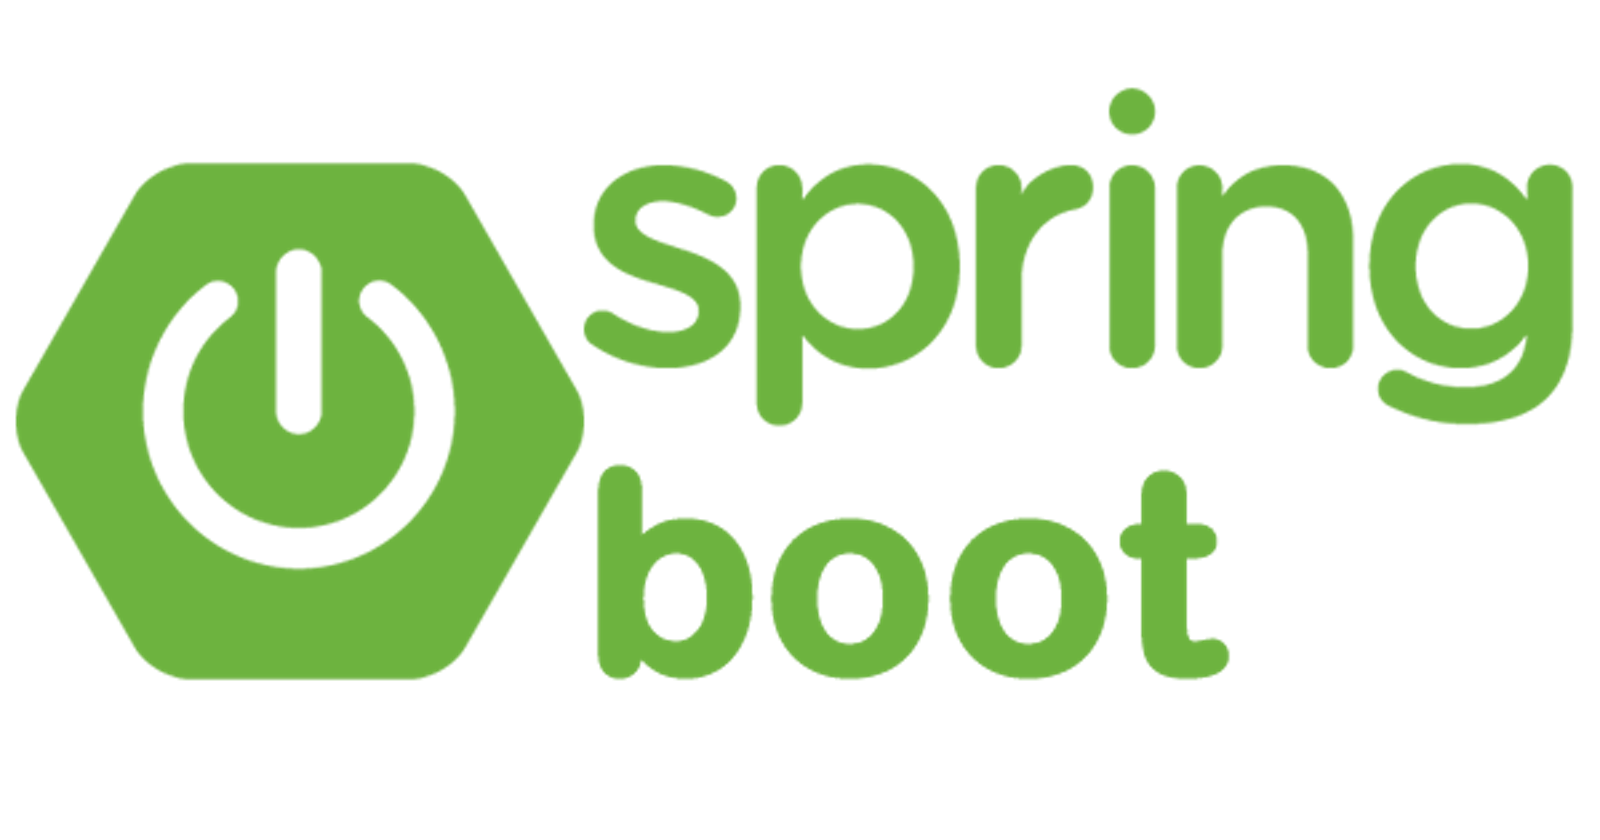 Spring Boot: "Easily build production-ready Spring-based applications"